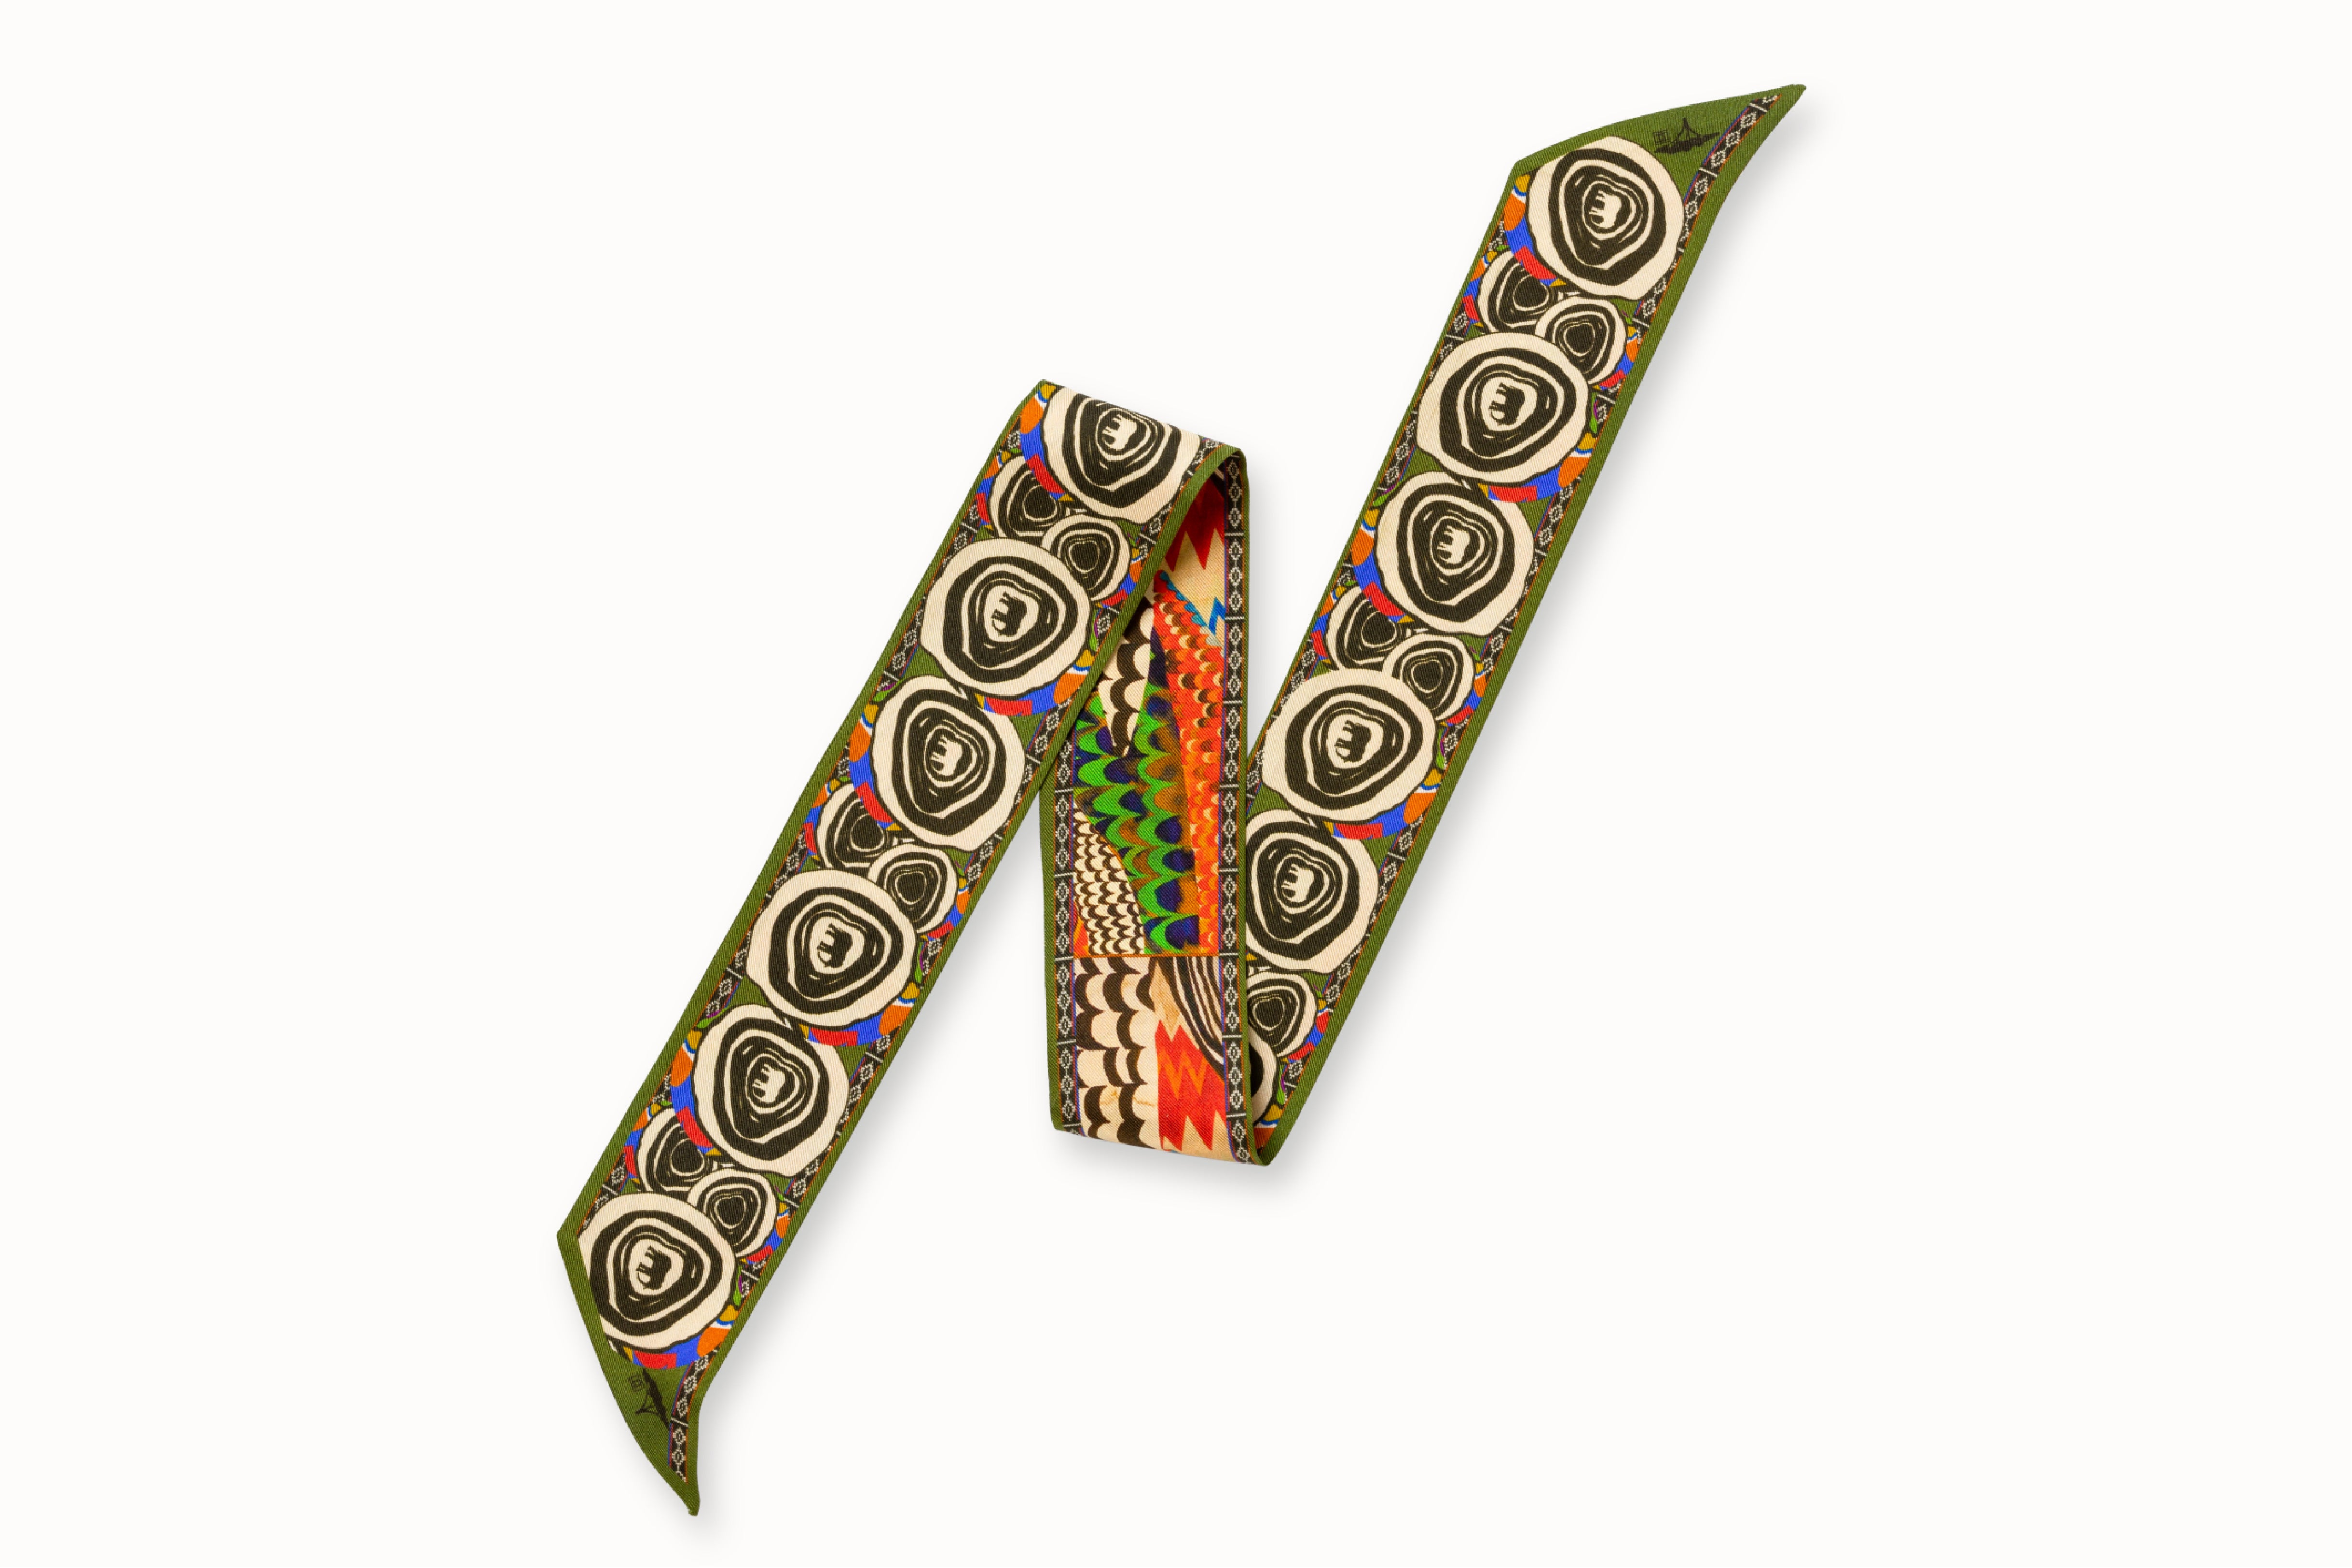 Flatlay image of 100% silk ribbon style scarf, 2” wide by 32” long folded into a zig-zag shape so both sides of the scarf are seen. Featuring an abstract elephant motif and a pattern inspired by a traditional African painting composed of orange, army green, and hints of blue. 